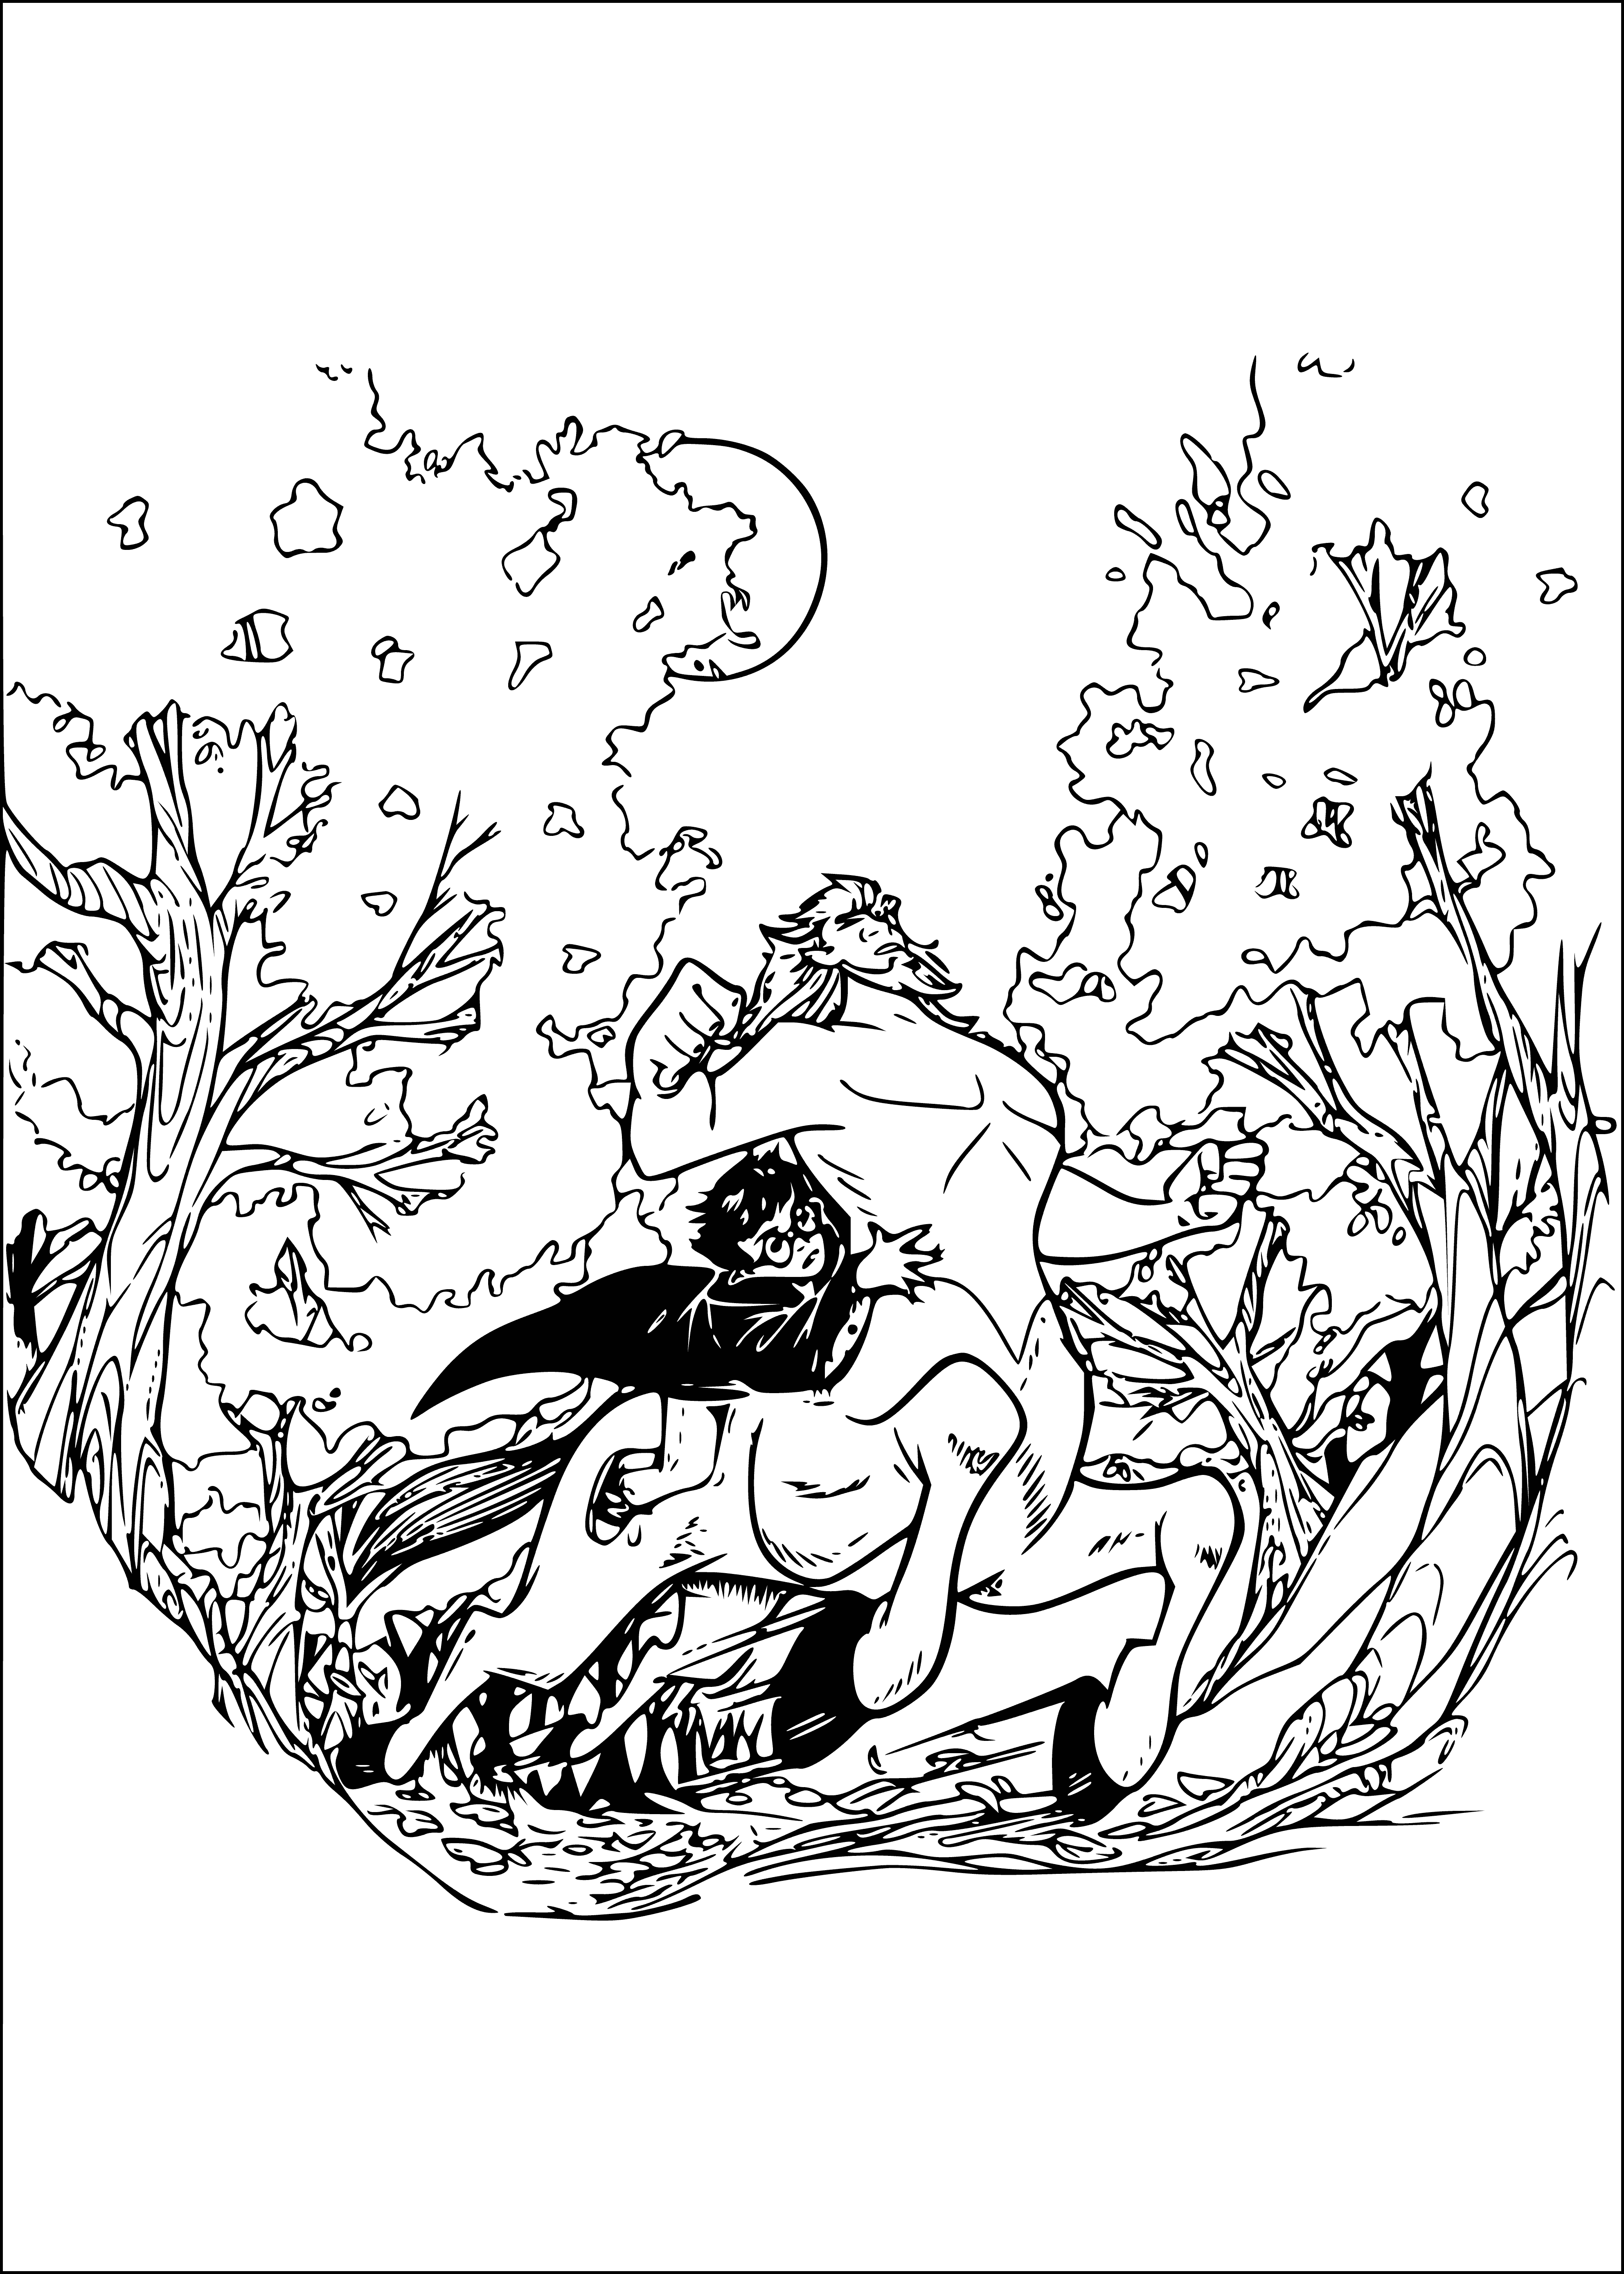 coloring page: Harry sits before a centaur, bearded & hairy, with bag & loincloth, brandishing a stick & holding a candle.